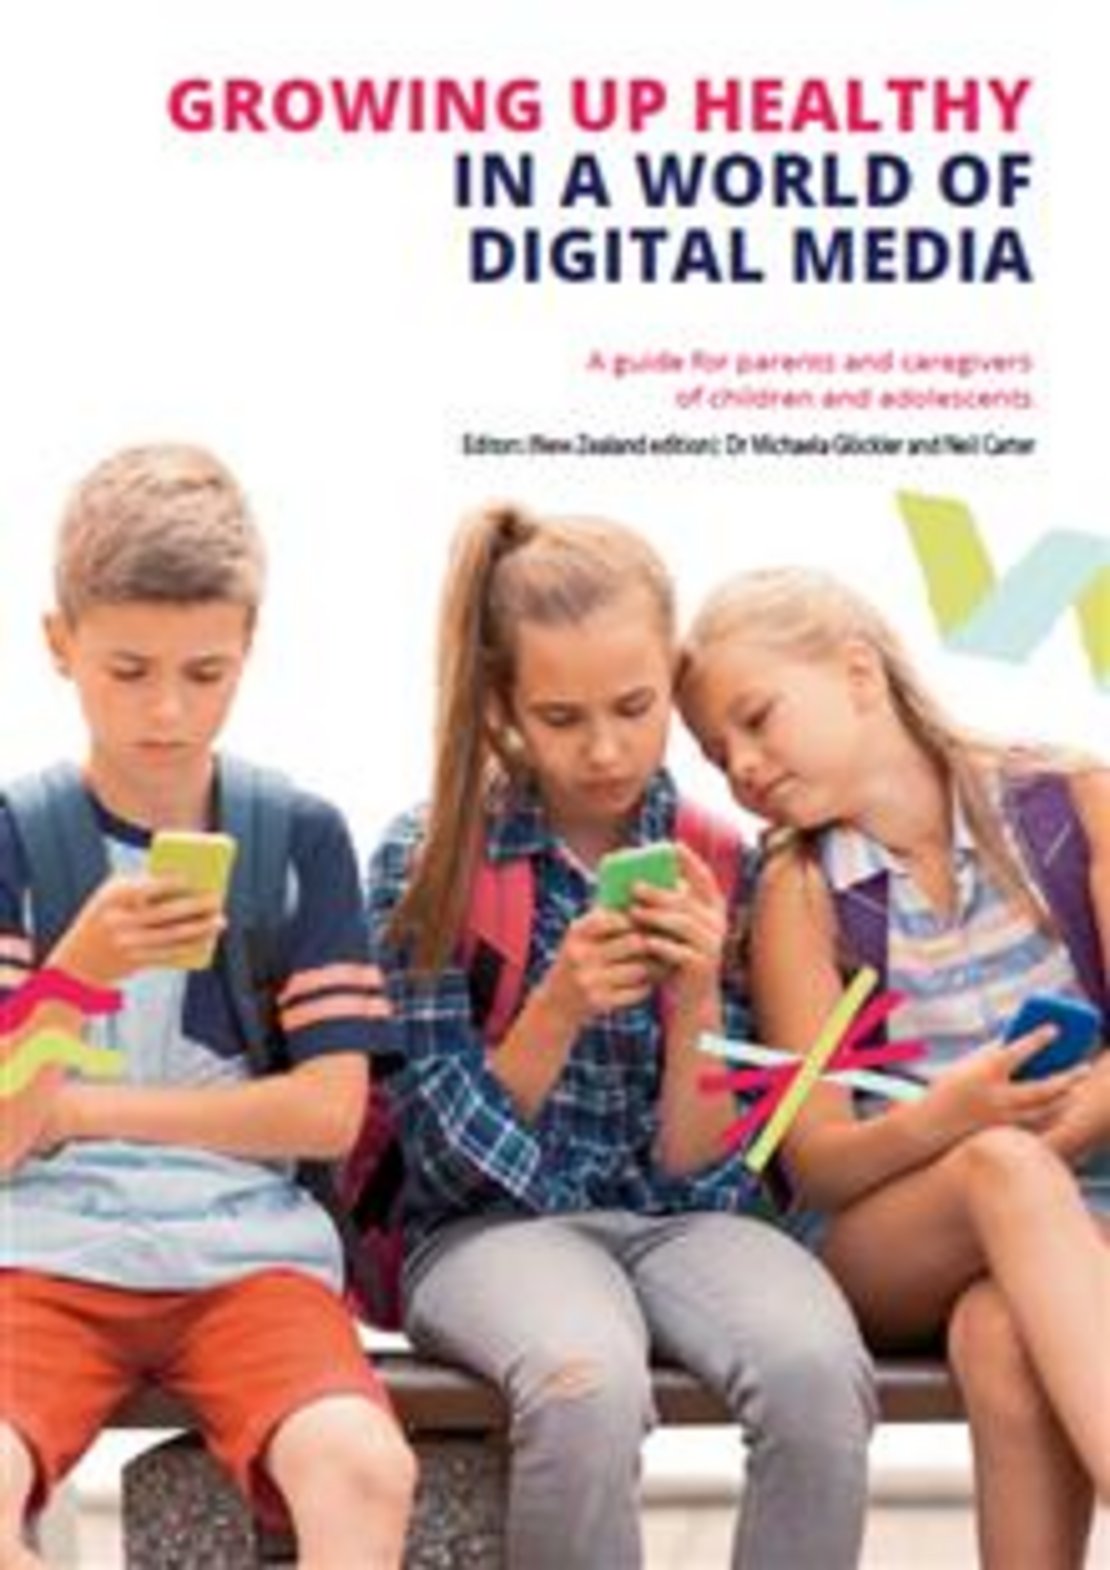 [Translate to English:] Growing up healthy in a World of Digital Media